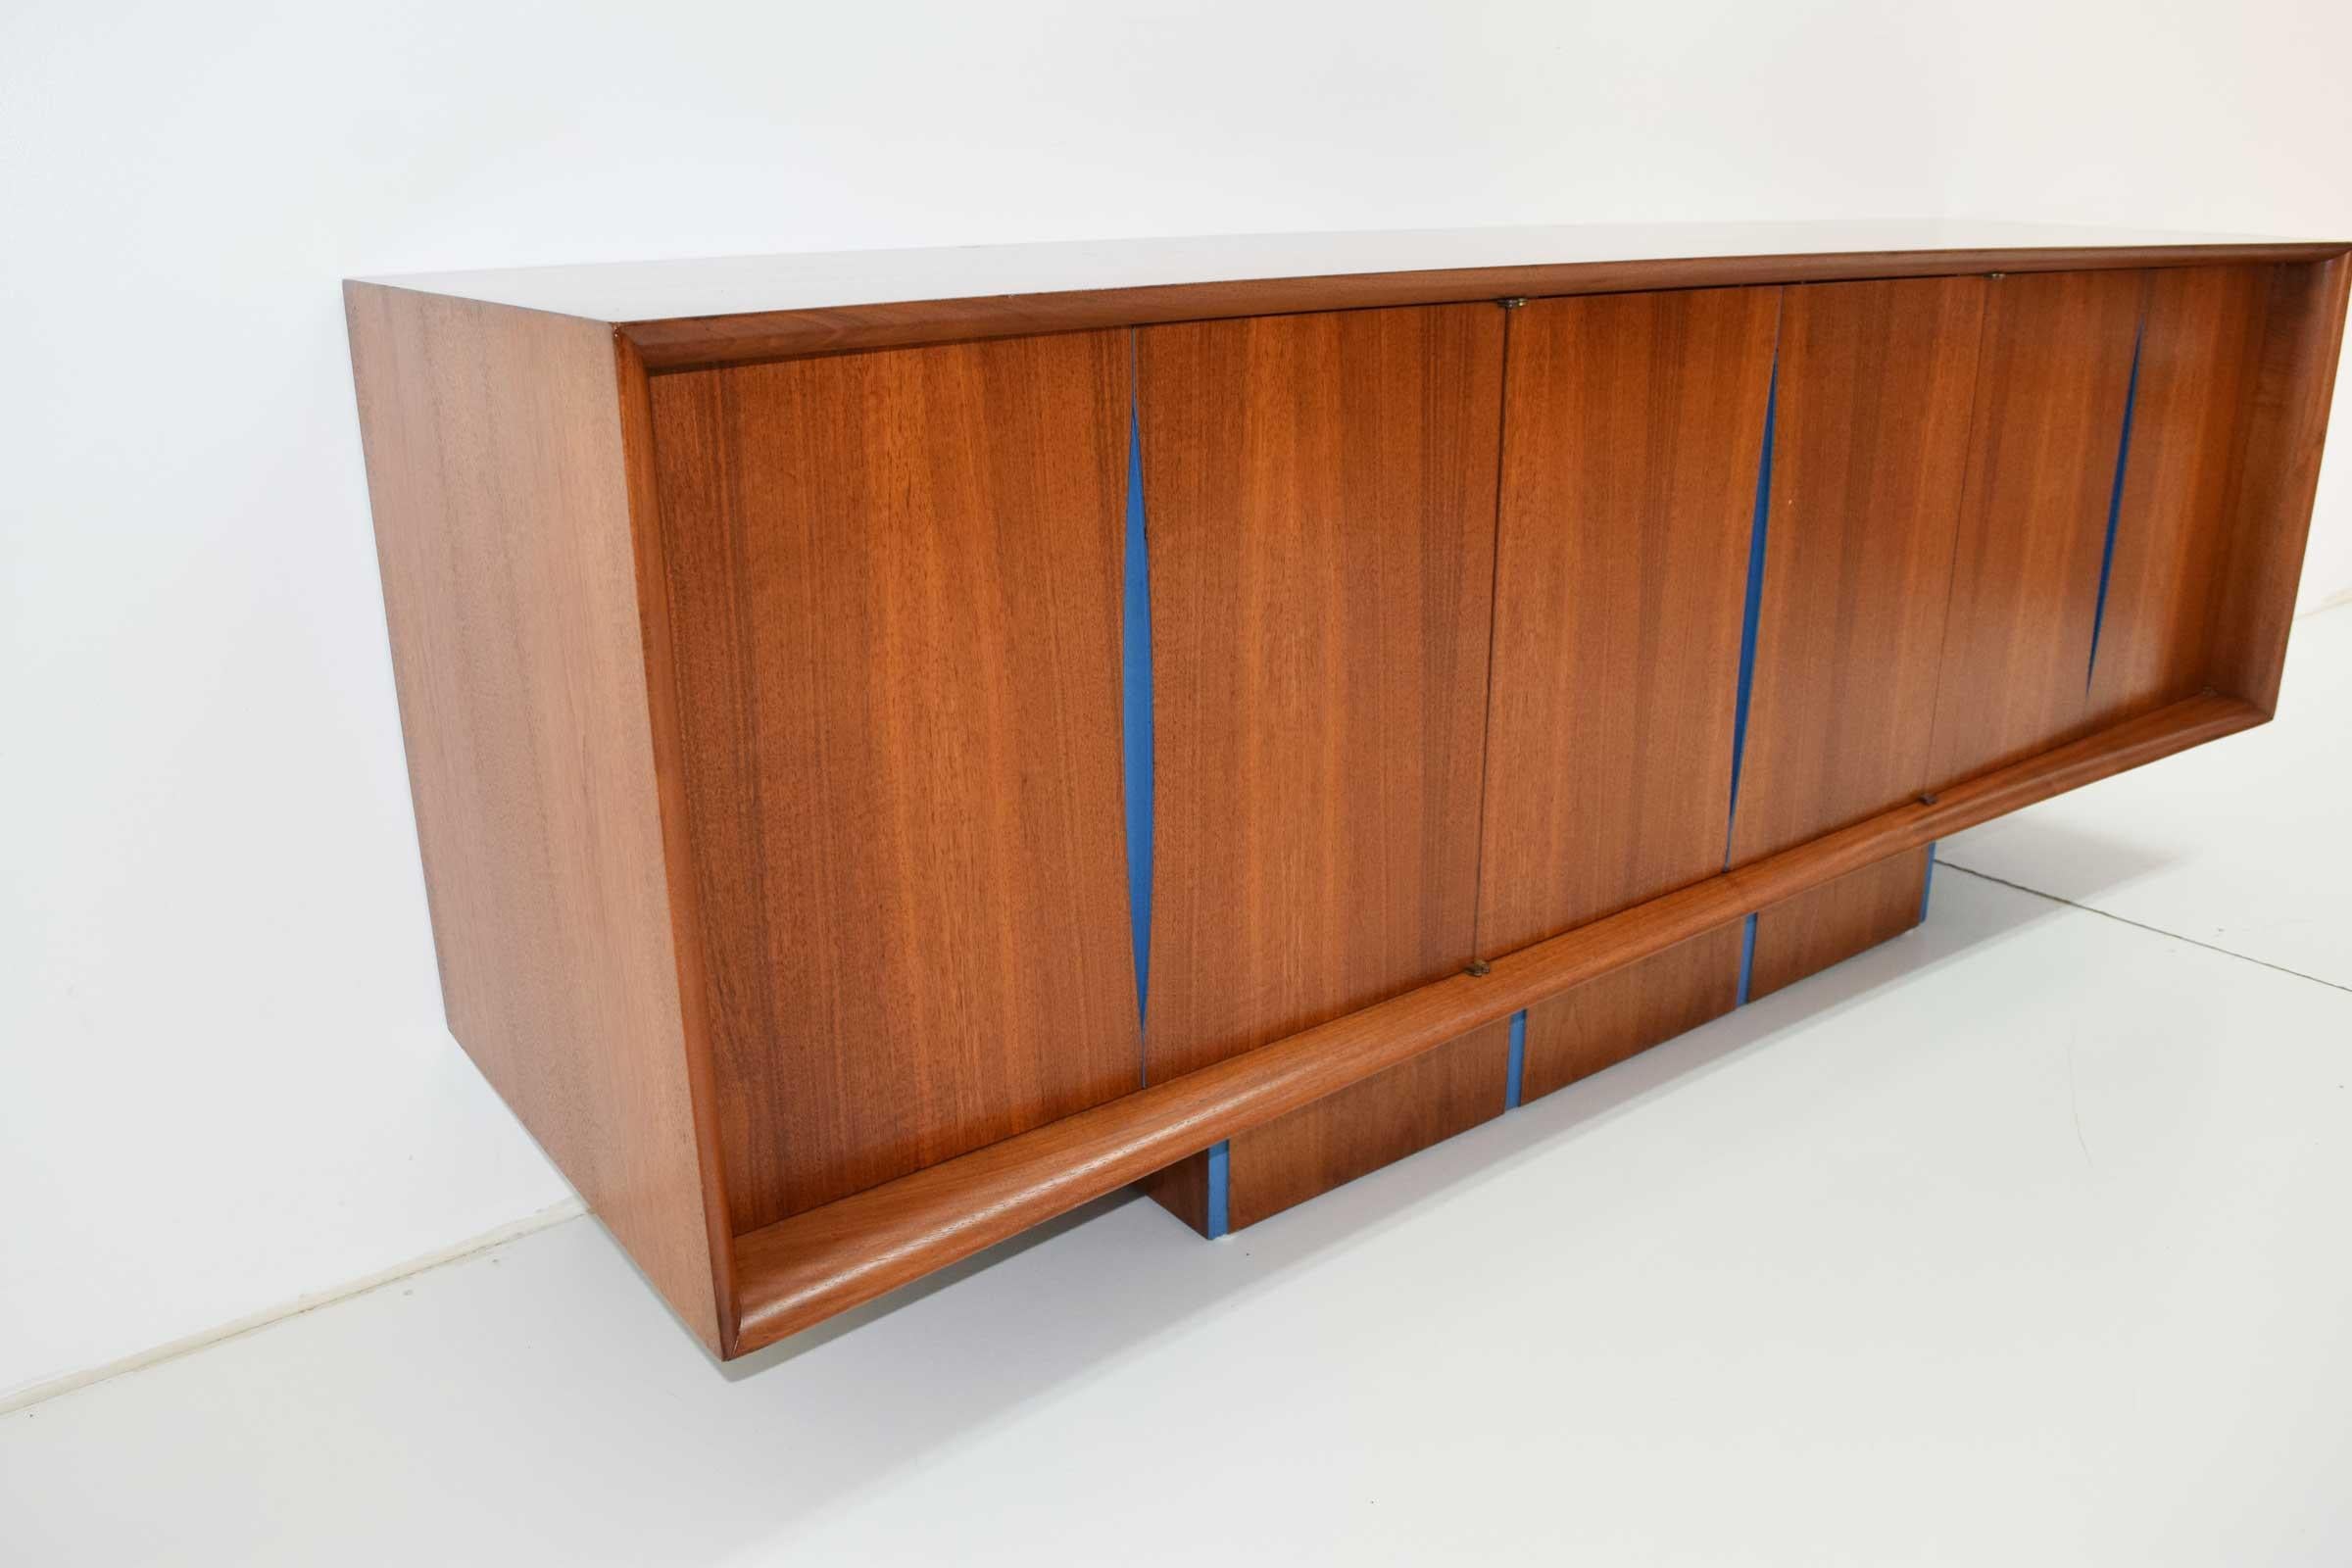 Made by Kagan-Dreyfuss in the 1950s. Cherrywood. This credenza has a upper storage unit available with it that has glass doors and shelving. Refer to photos. The cabinet has been painted the blue to accent the design. This can be refinished to